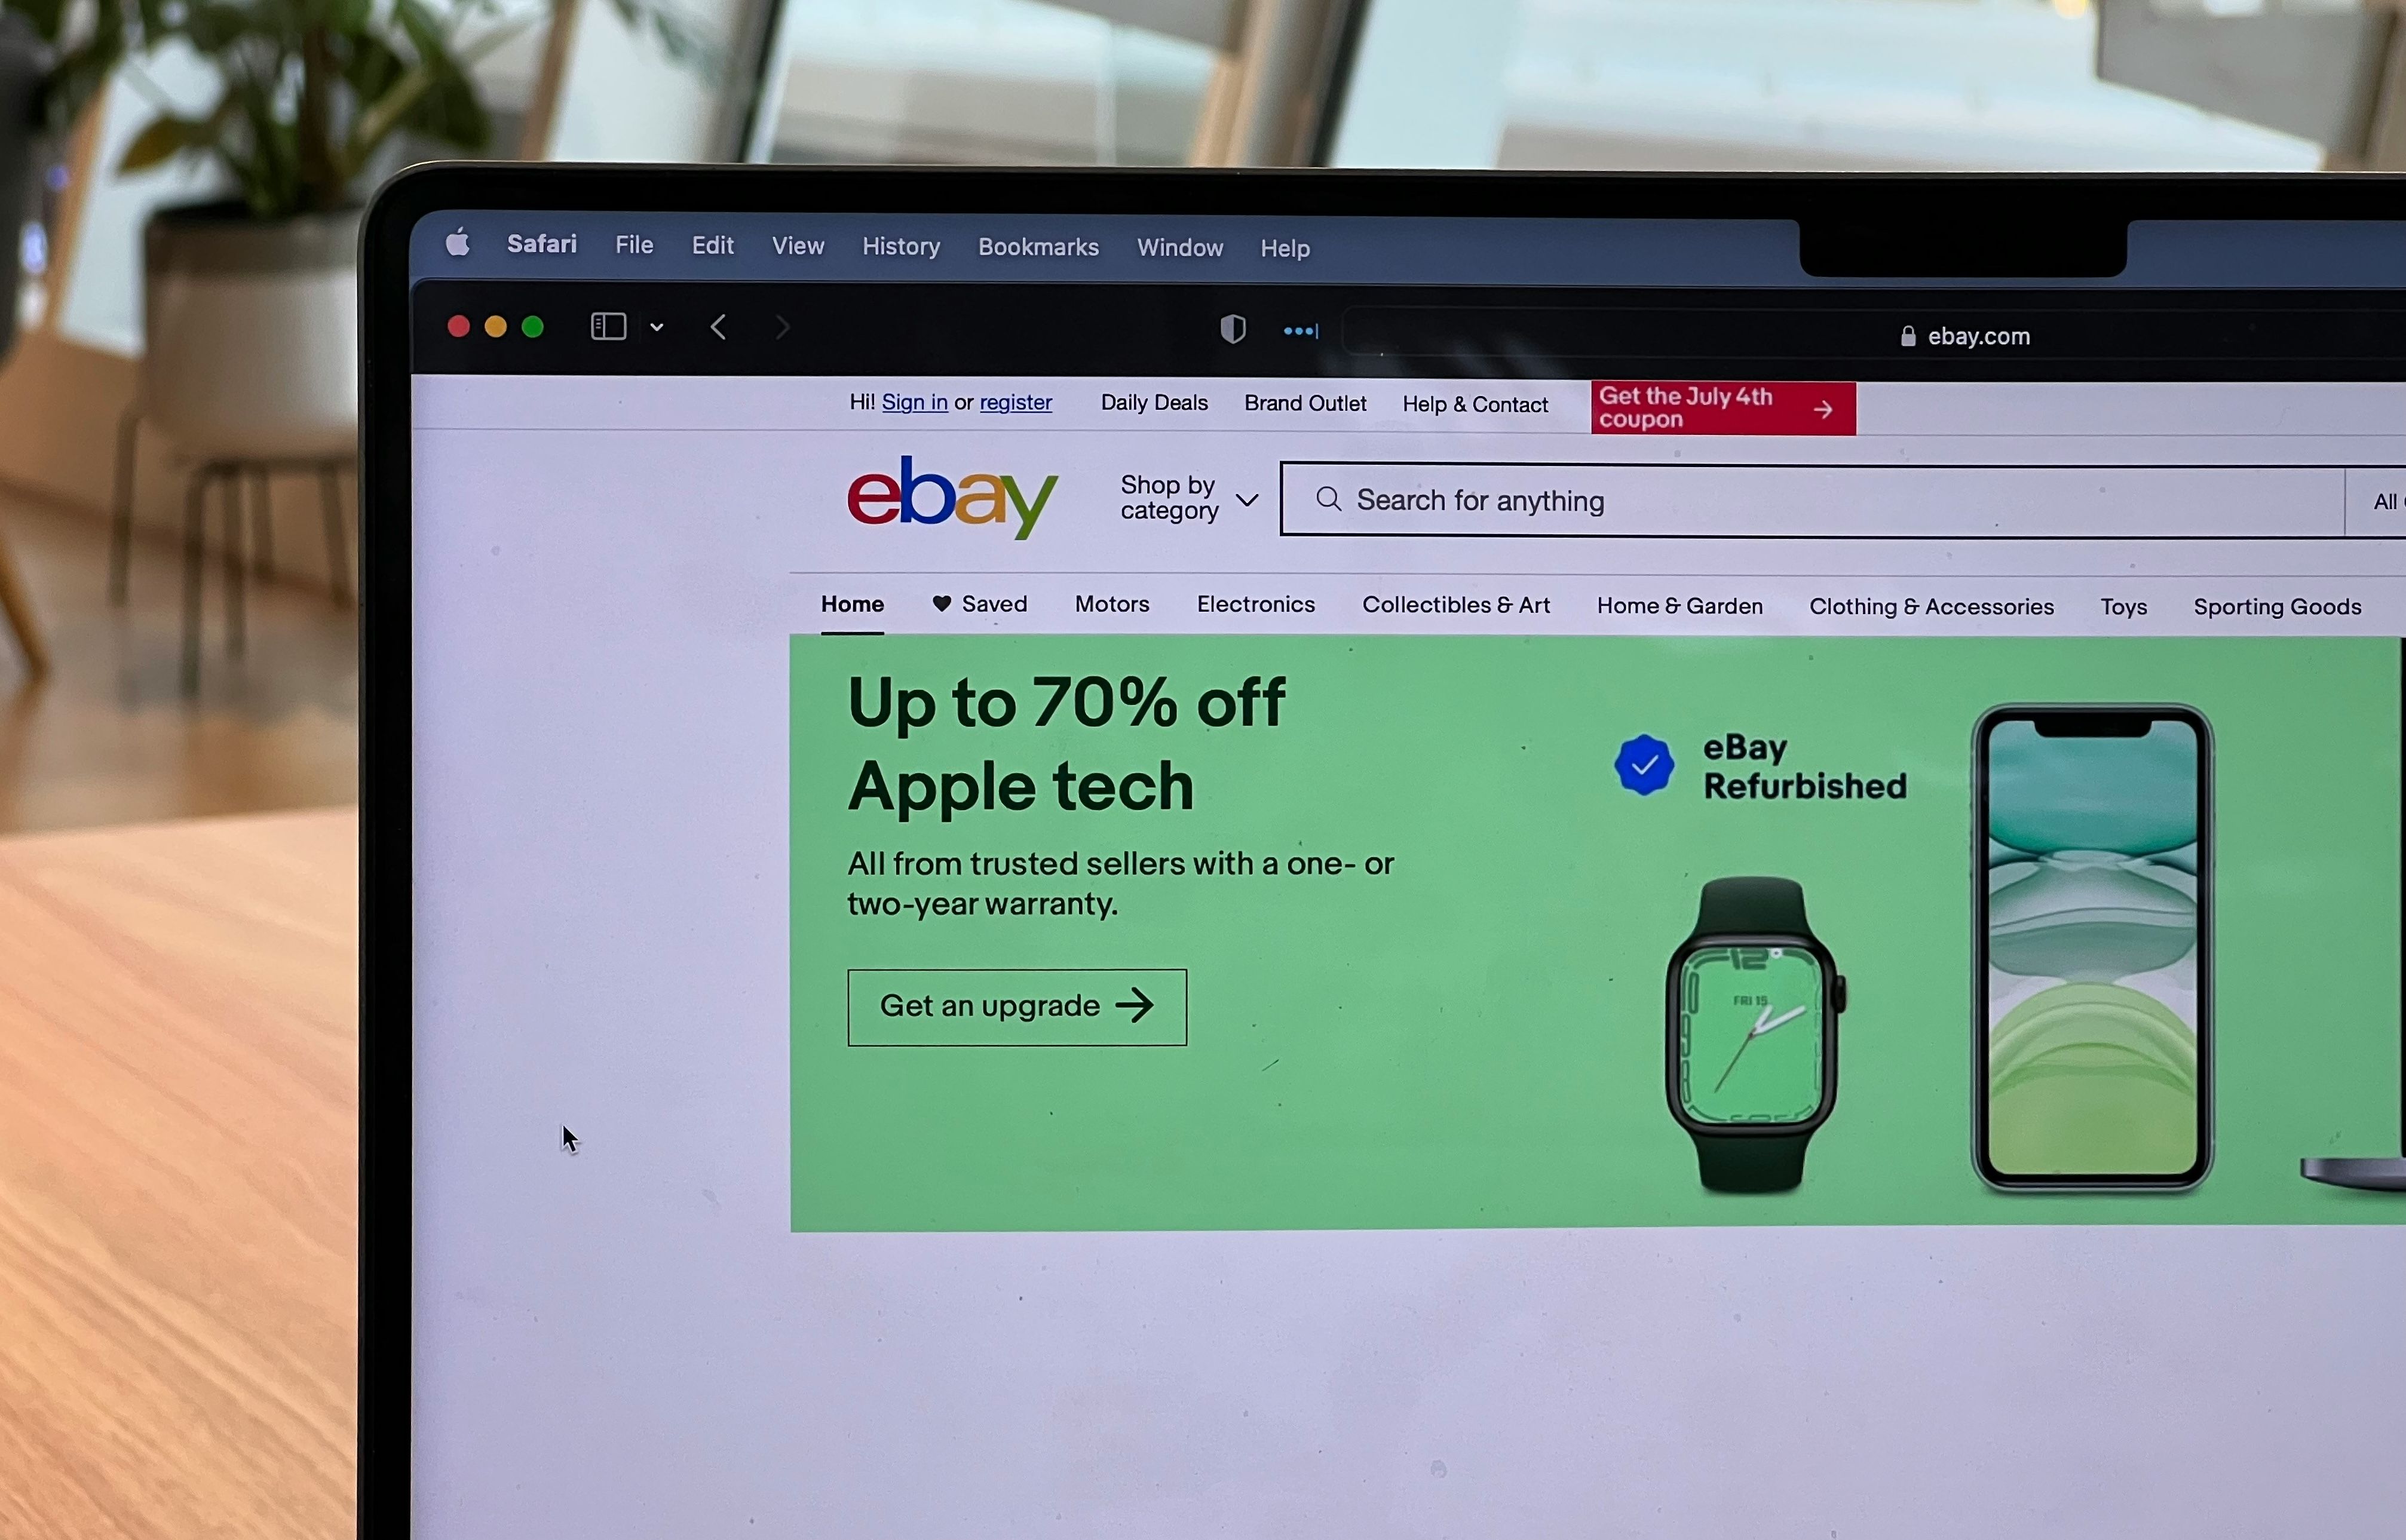 A screenshot of the eBay marketplace homepage highlighting its vast product categories and search features